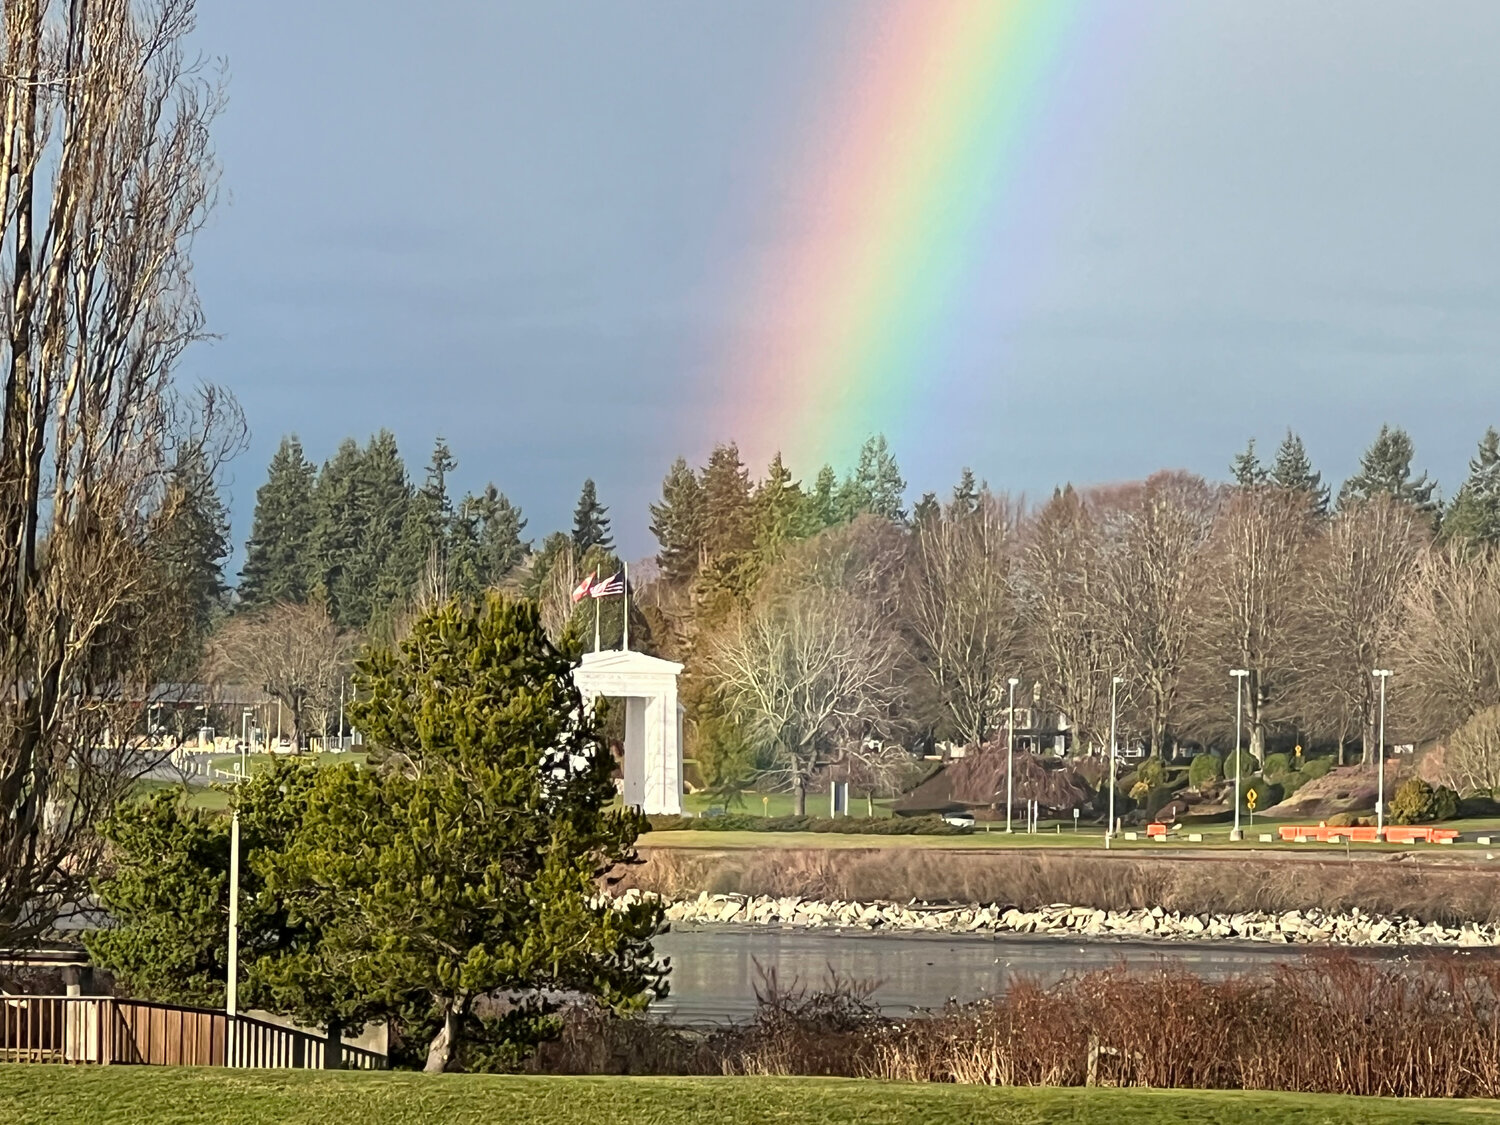 A rainbow added a pop of color over the Peace Arch at the U.S./Canada border on February 1.